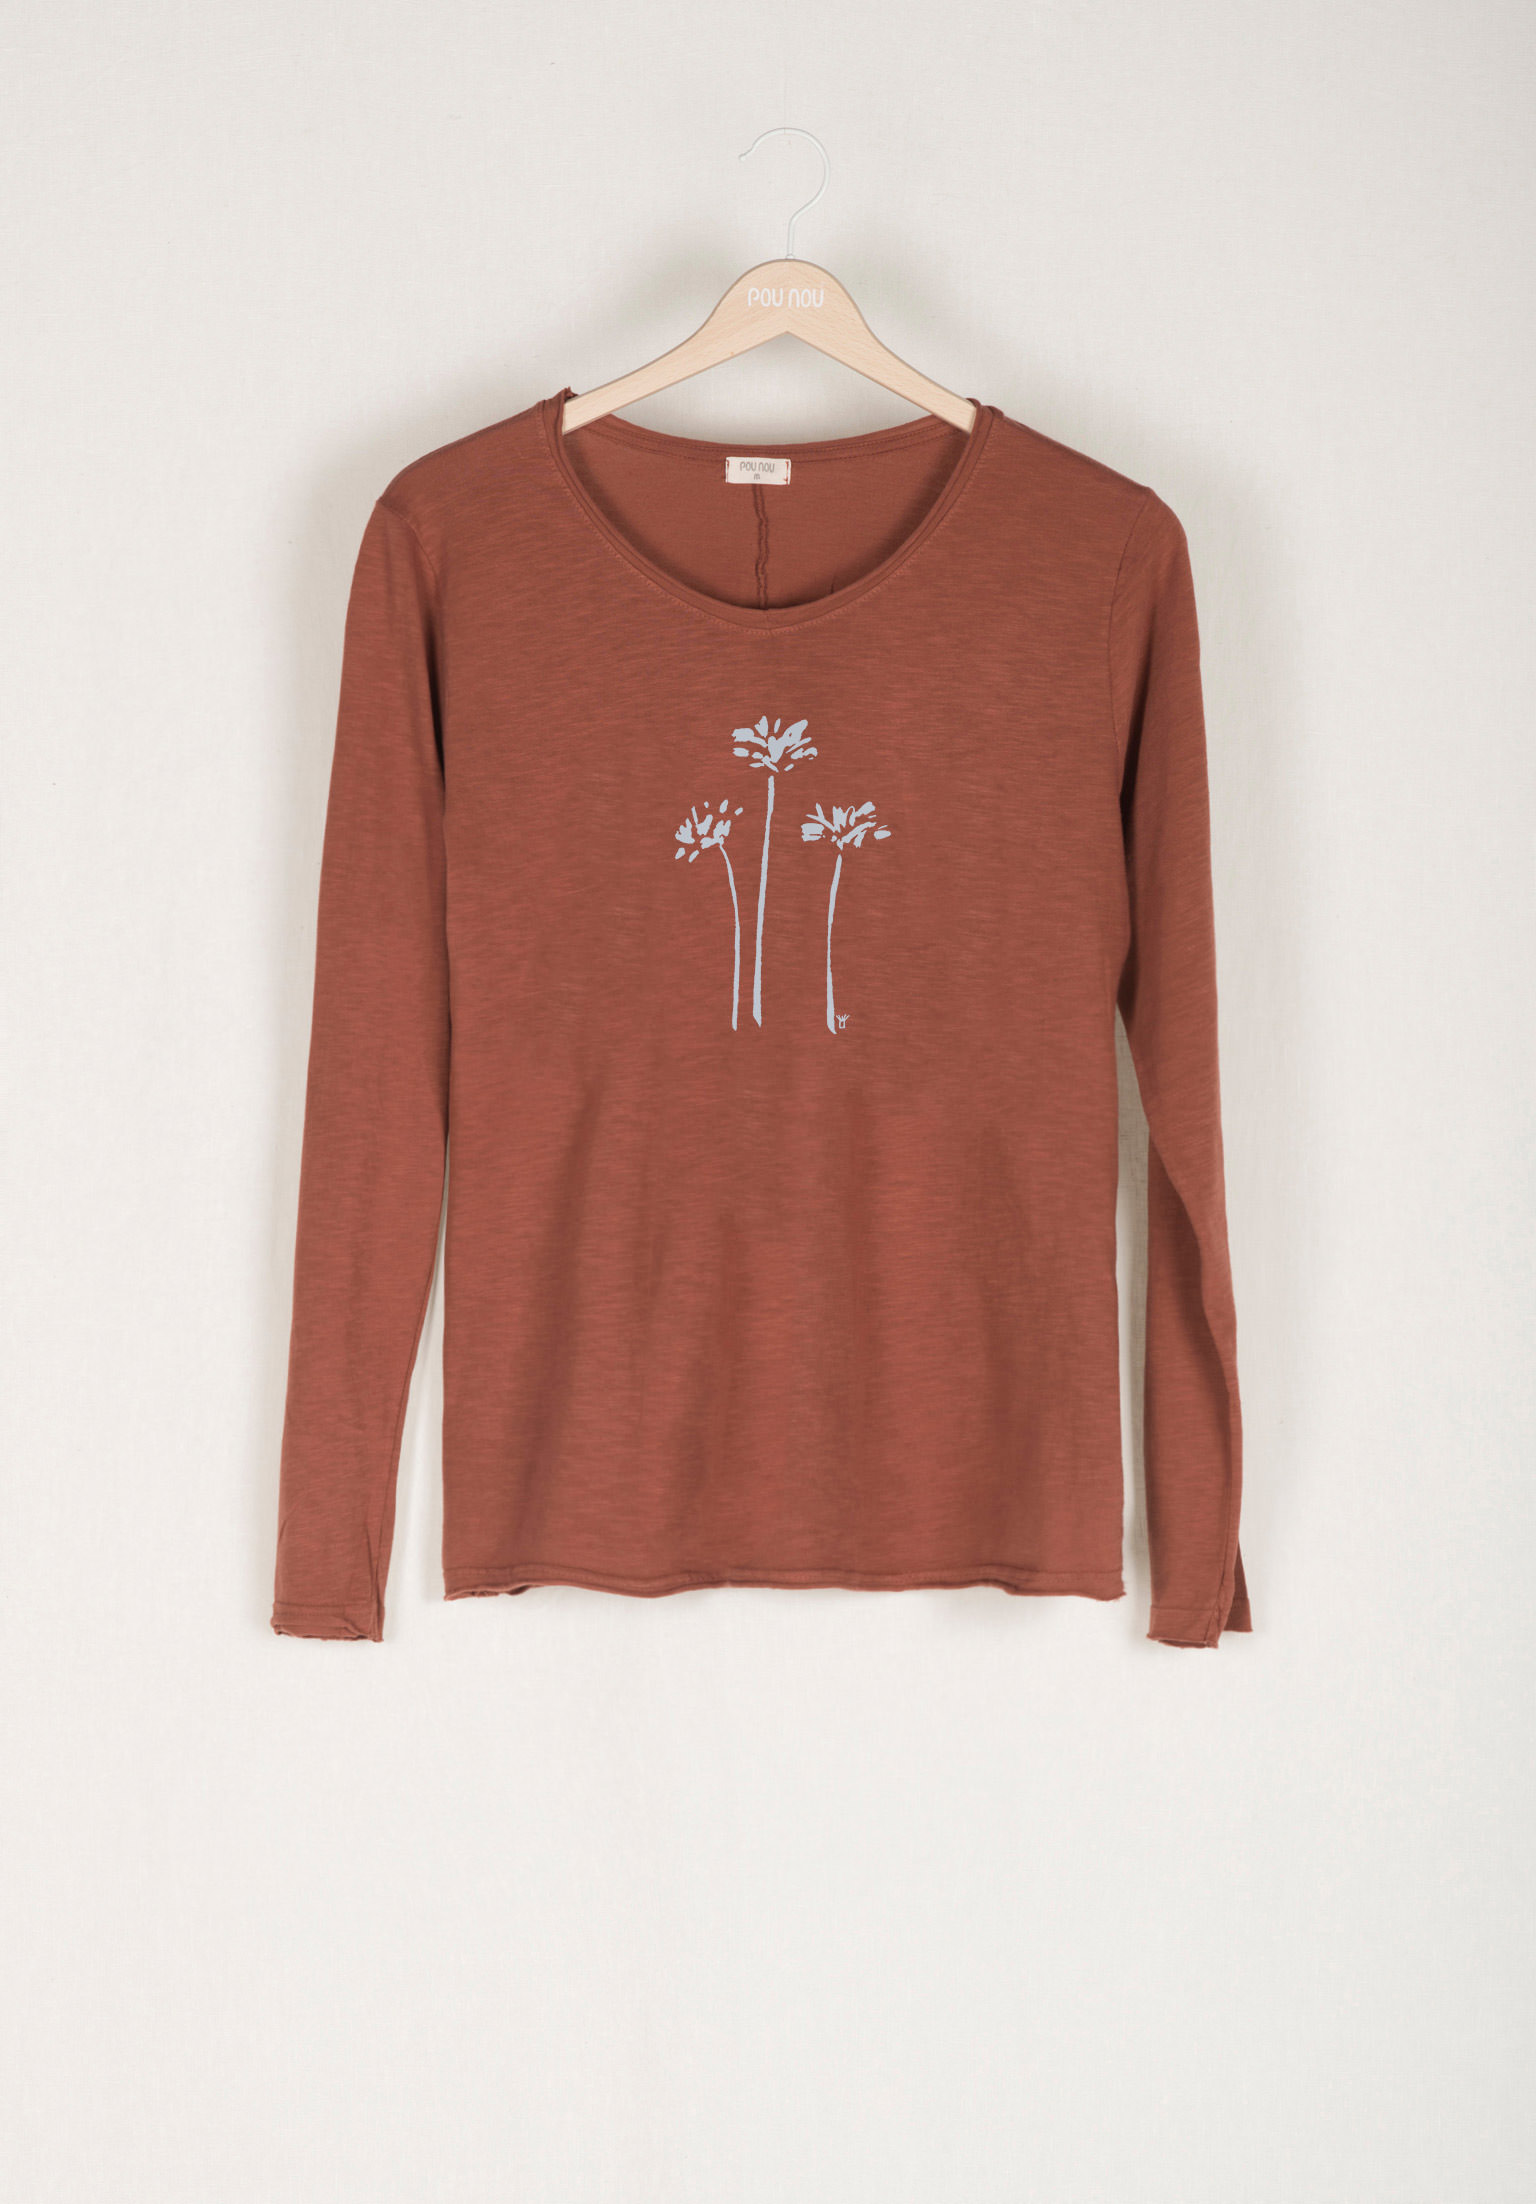 Long-sleeved cotton T-shirt sophistication